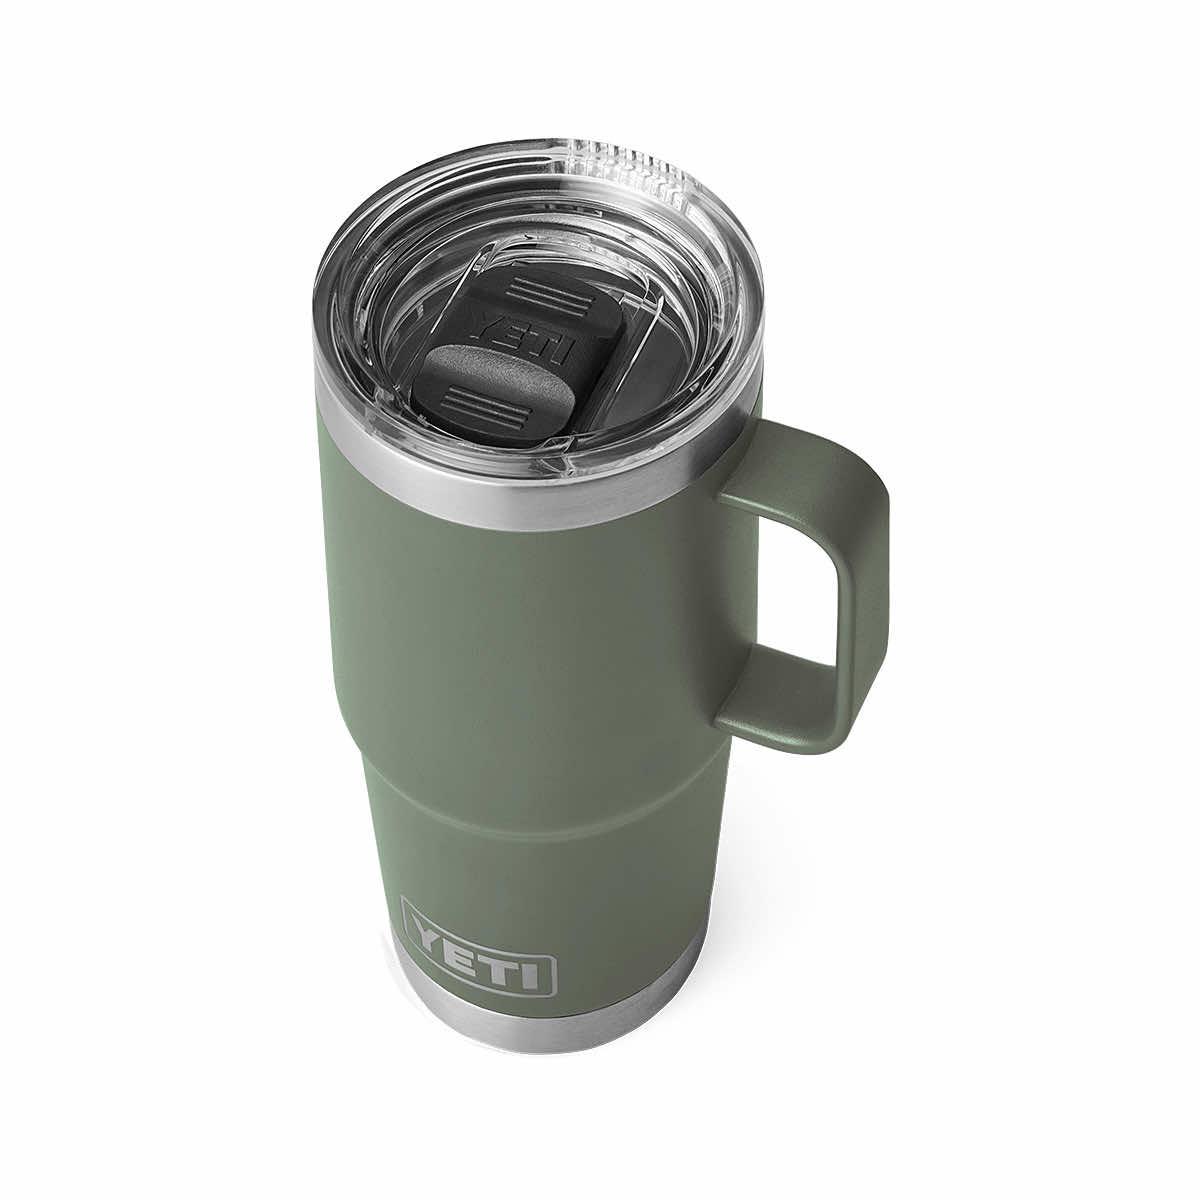 YETI 18 oz. Rambler Bottle with Color-Matched Straw Cap